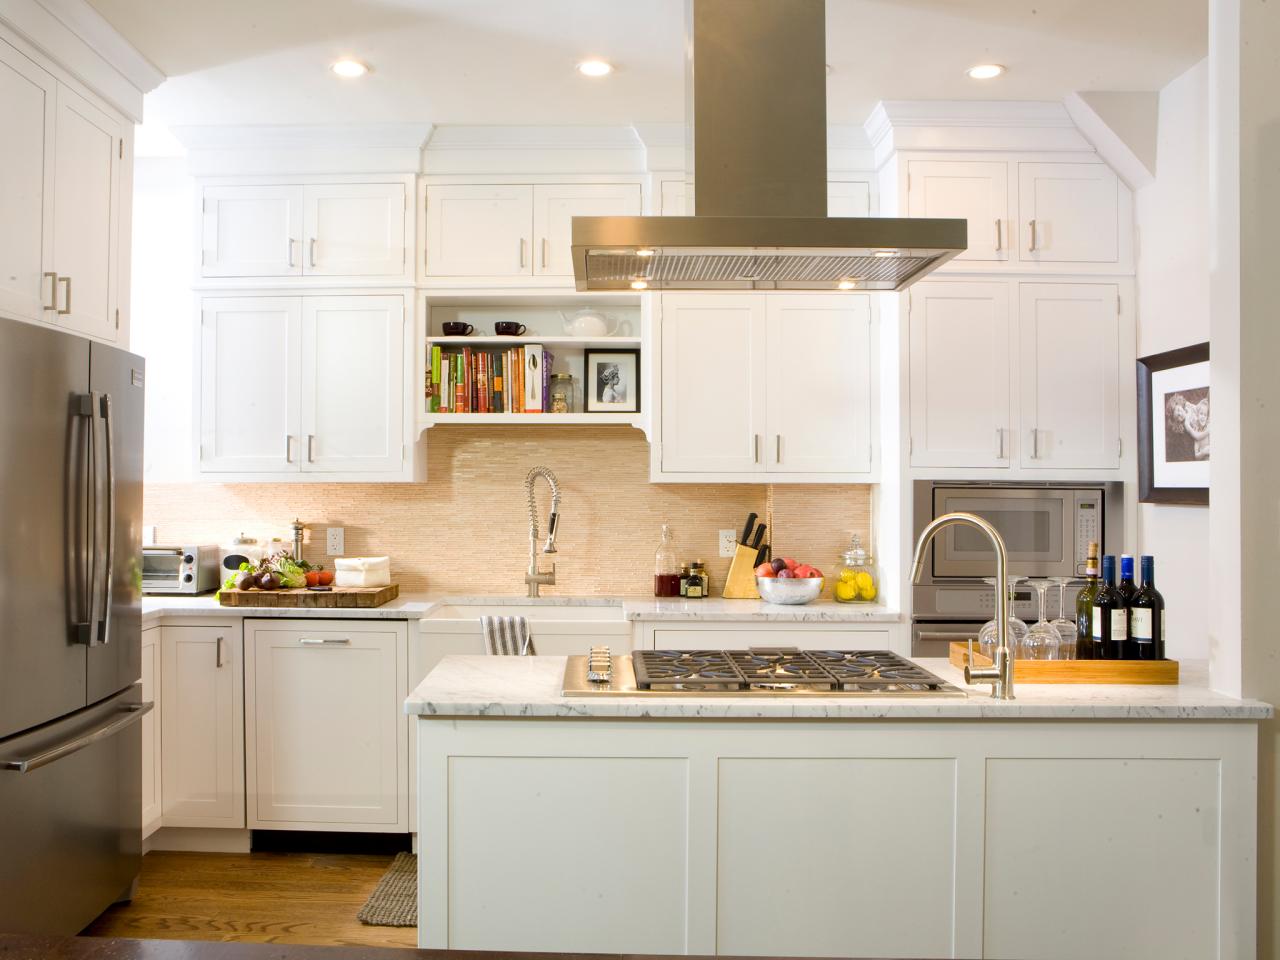 White Kitchen Cabinets Pictures, Options, Tips & Ideas   HGTV